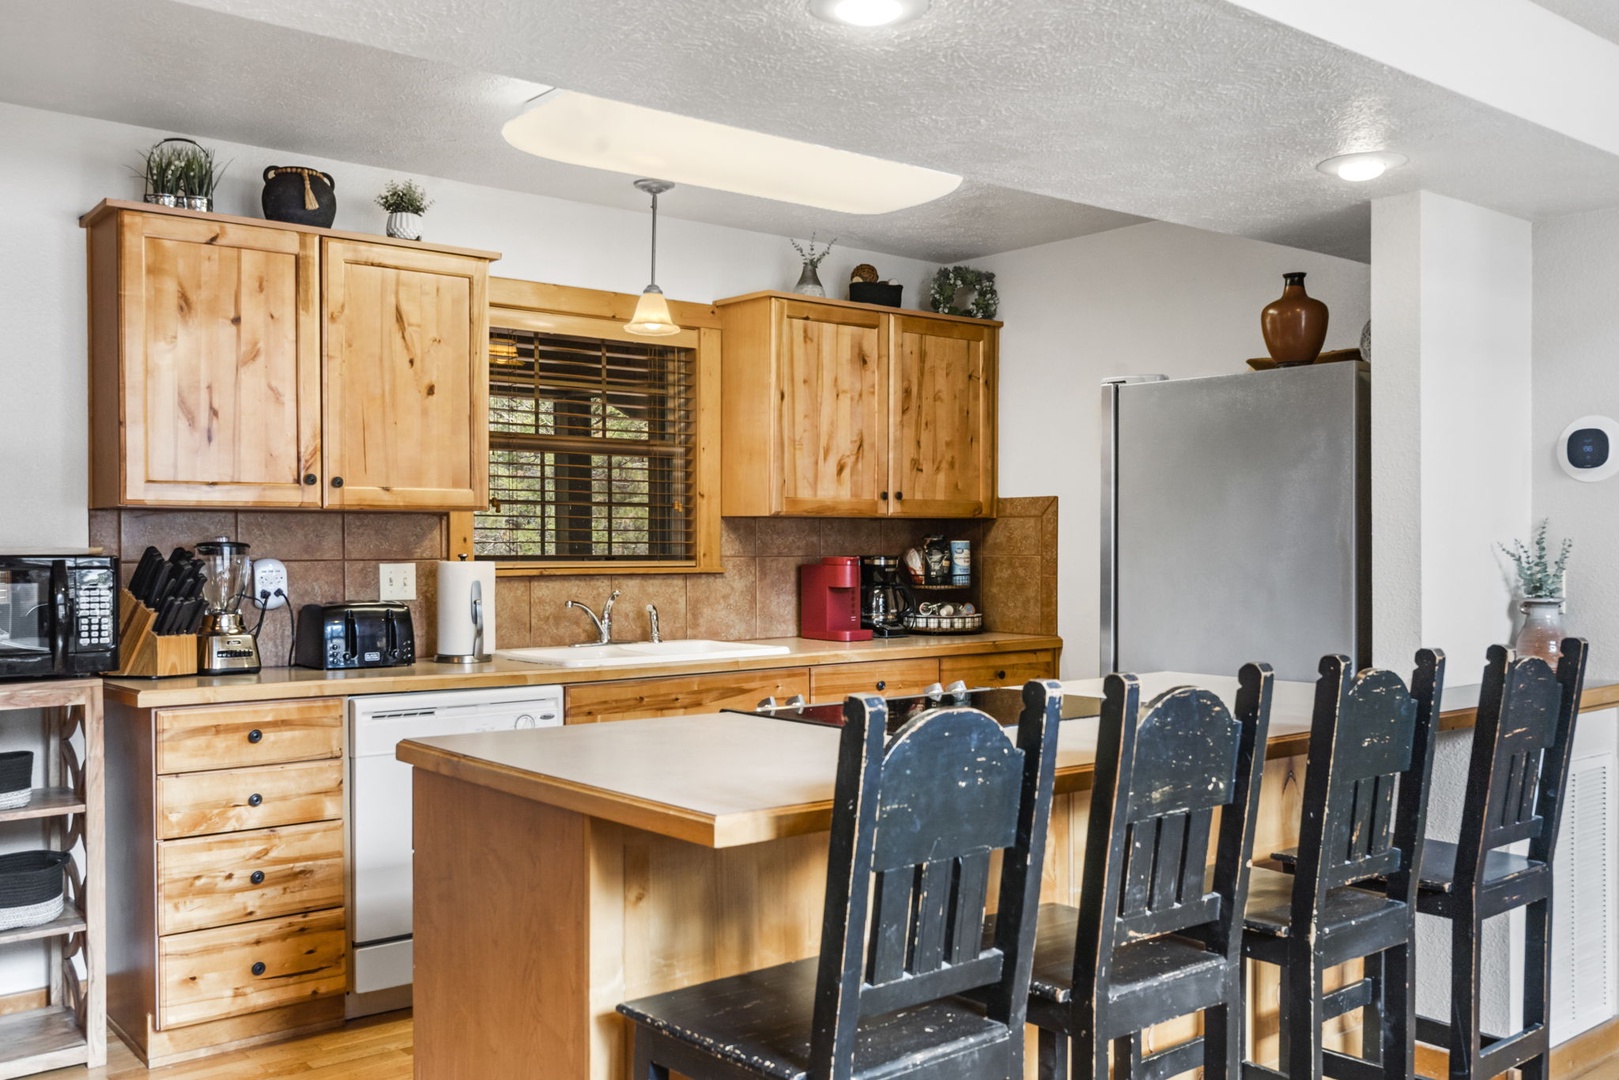 Your open kitchen offering wonderful conveniences and counter seating for 4